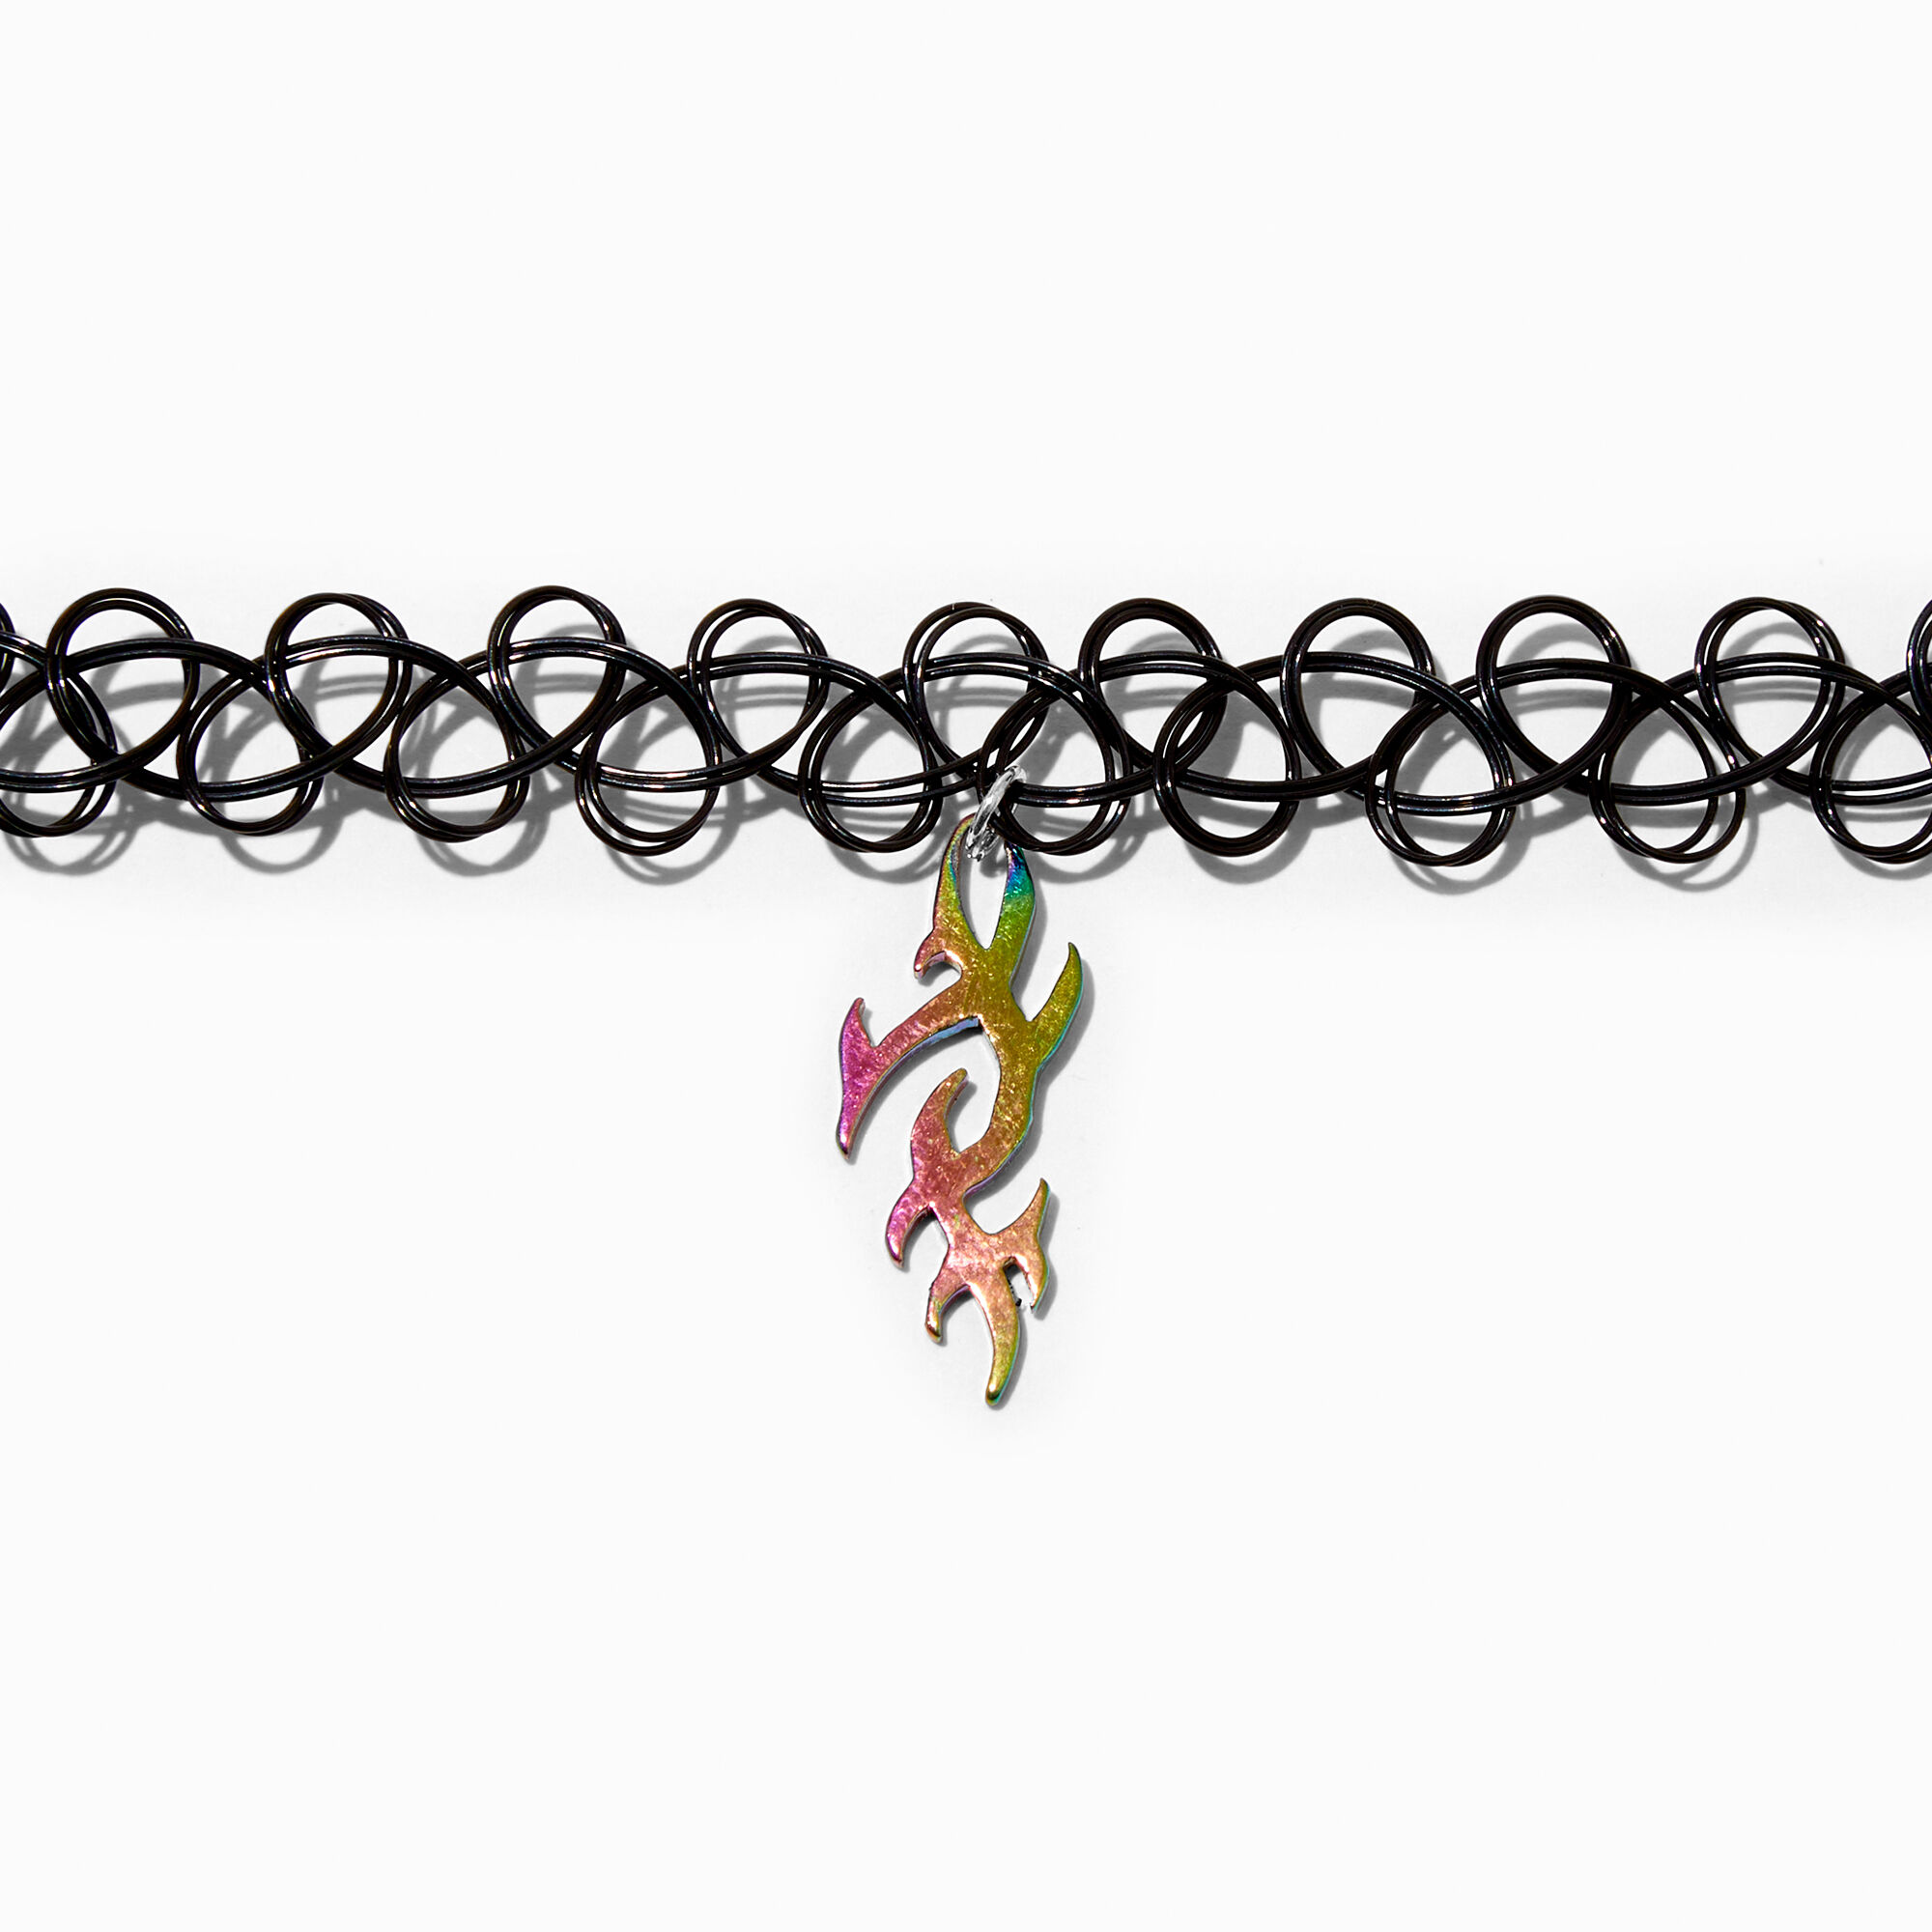 View Claires Anodized Flame Blacktattoo Choker Necklace information